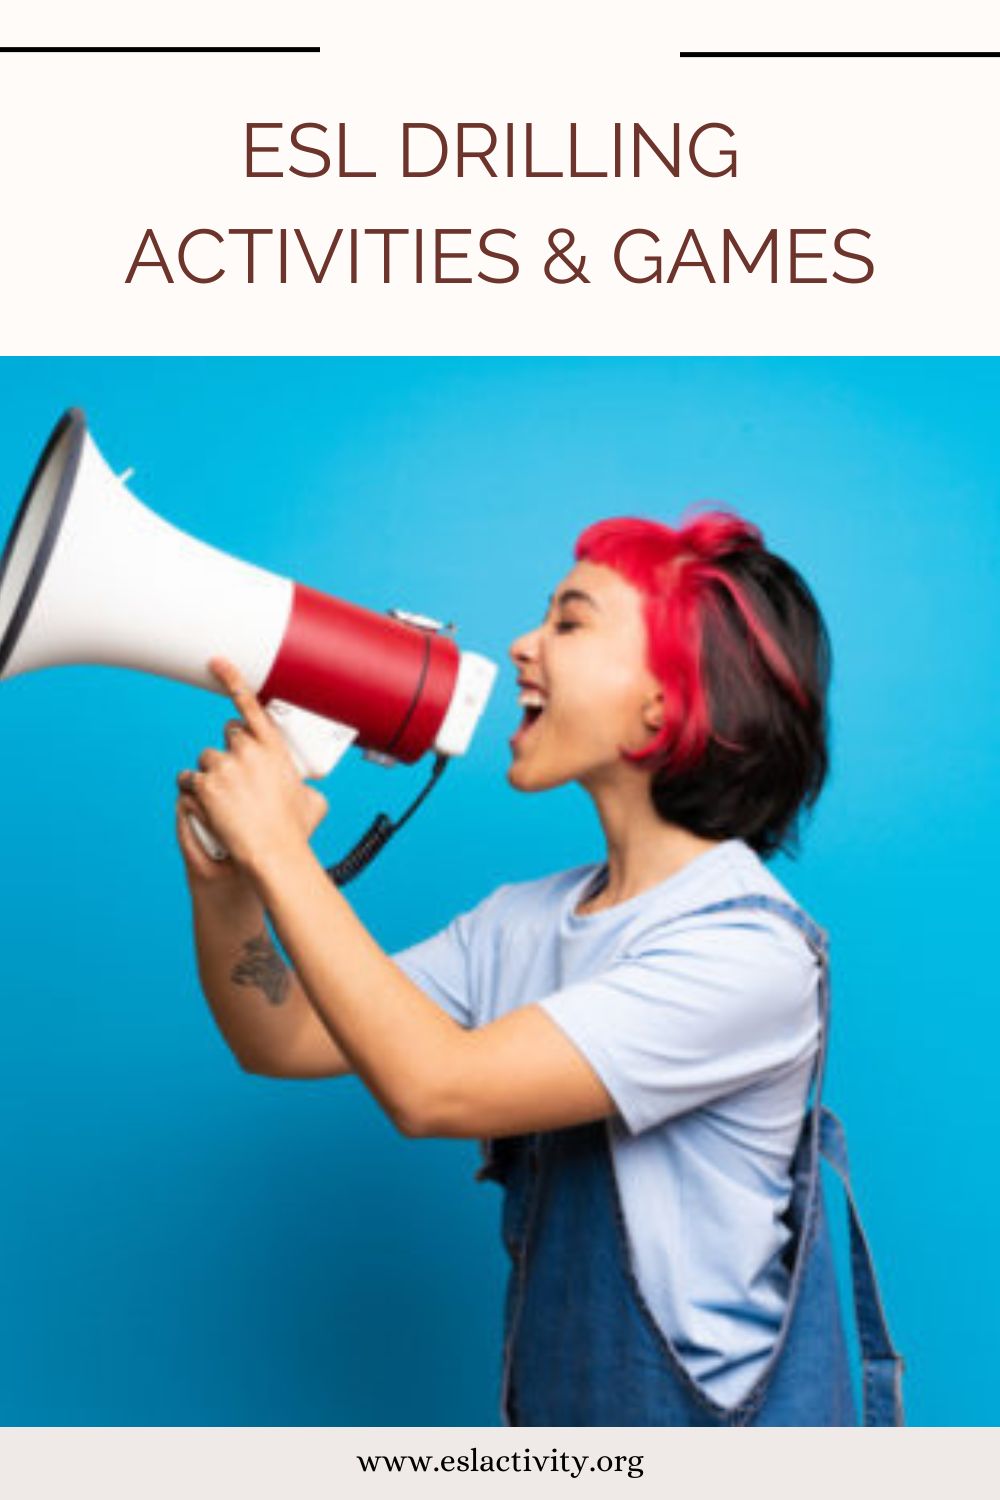 ESL drilling activities and games